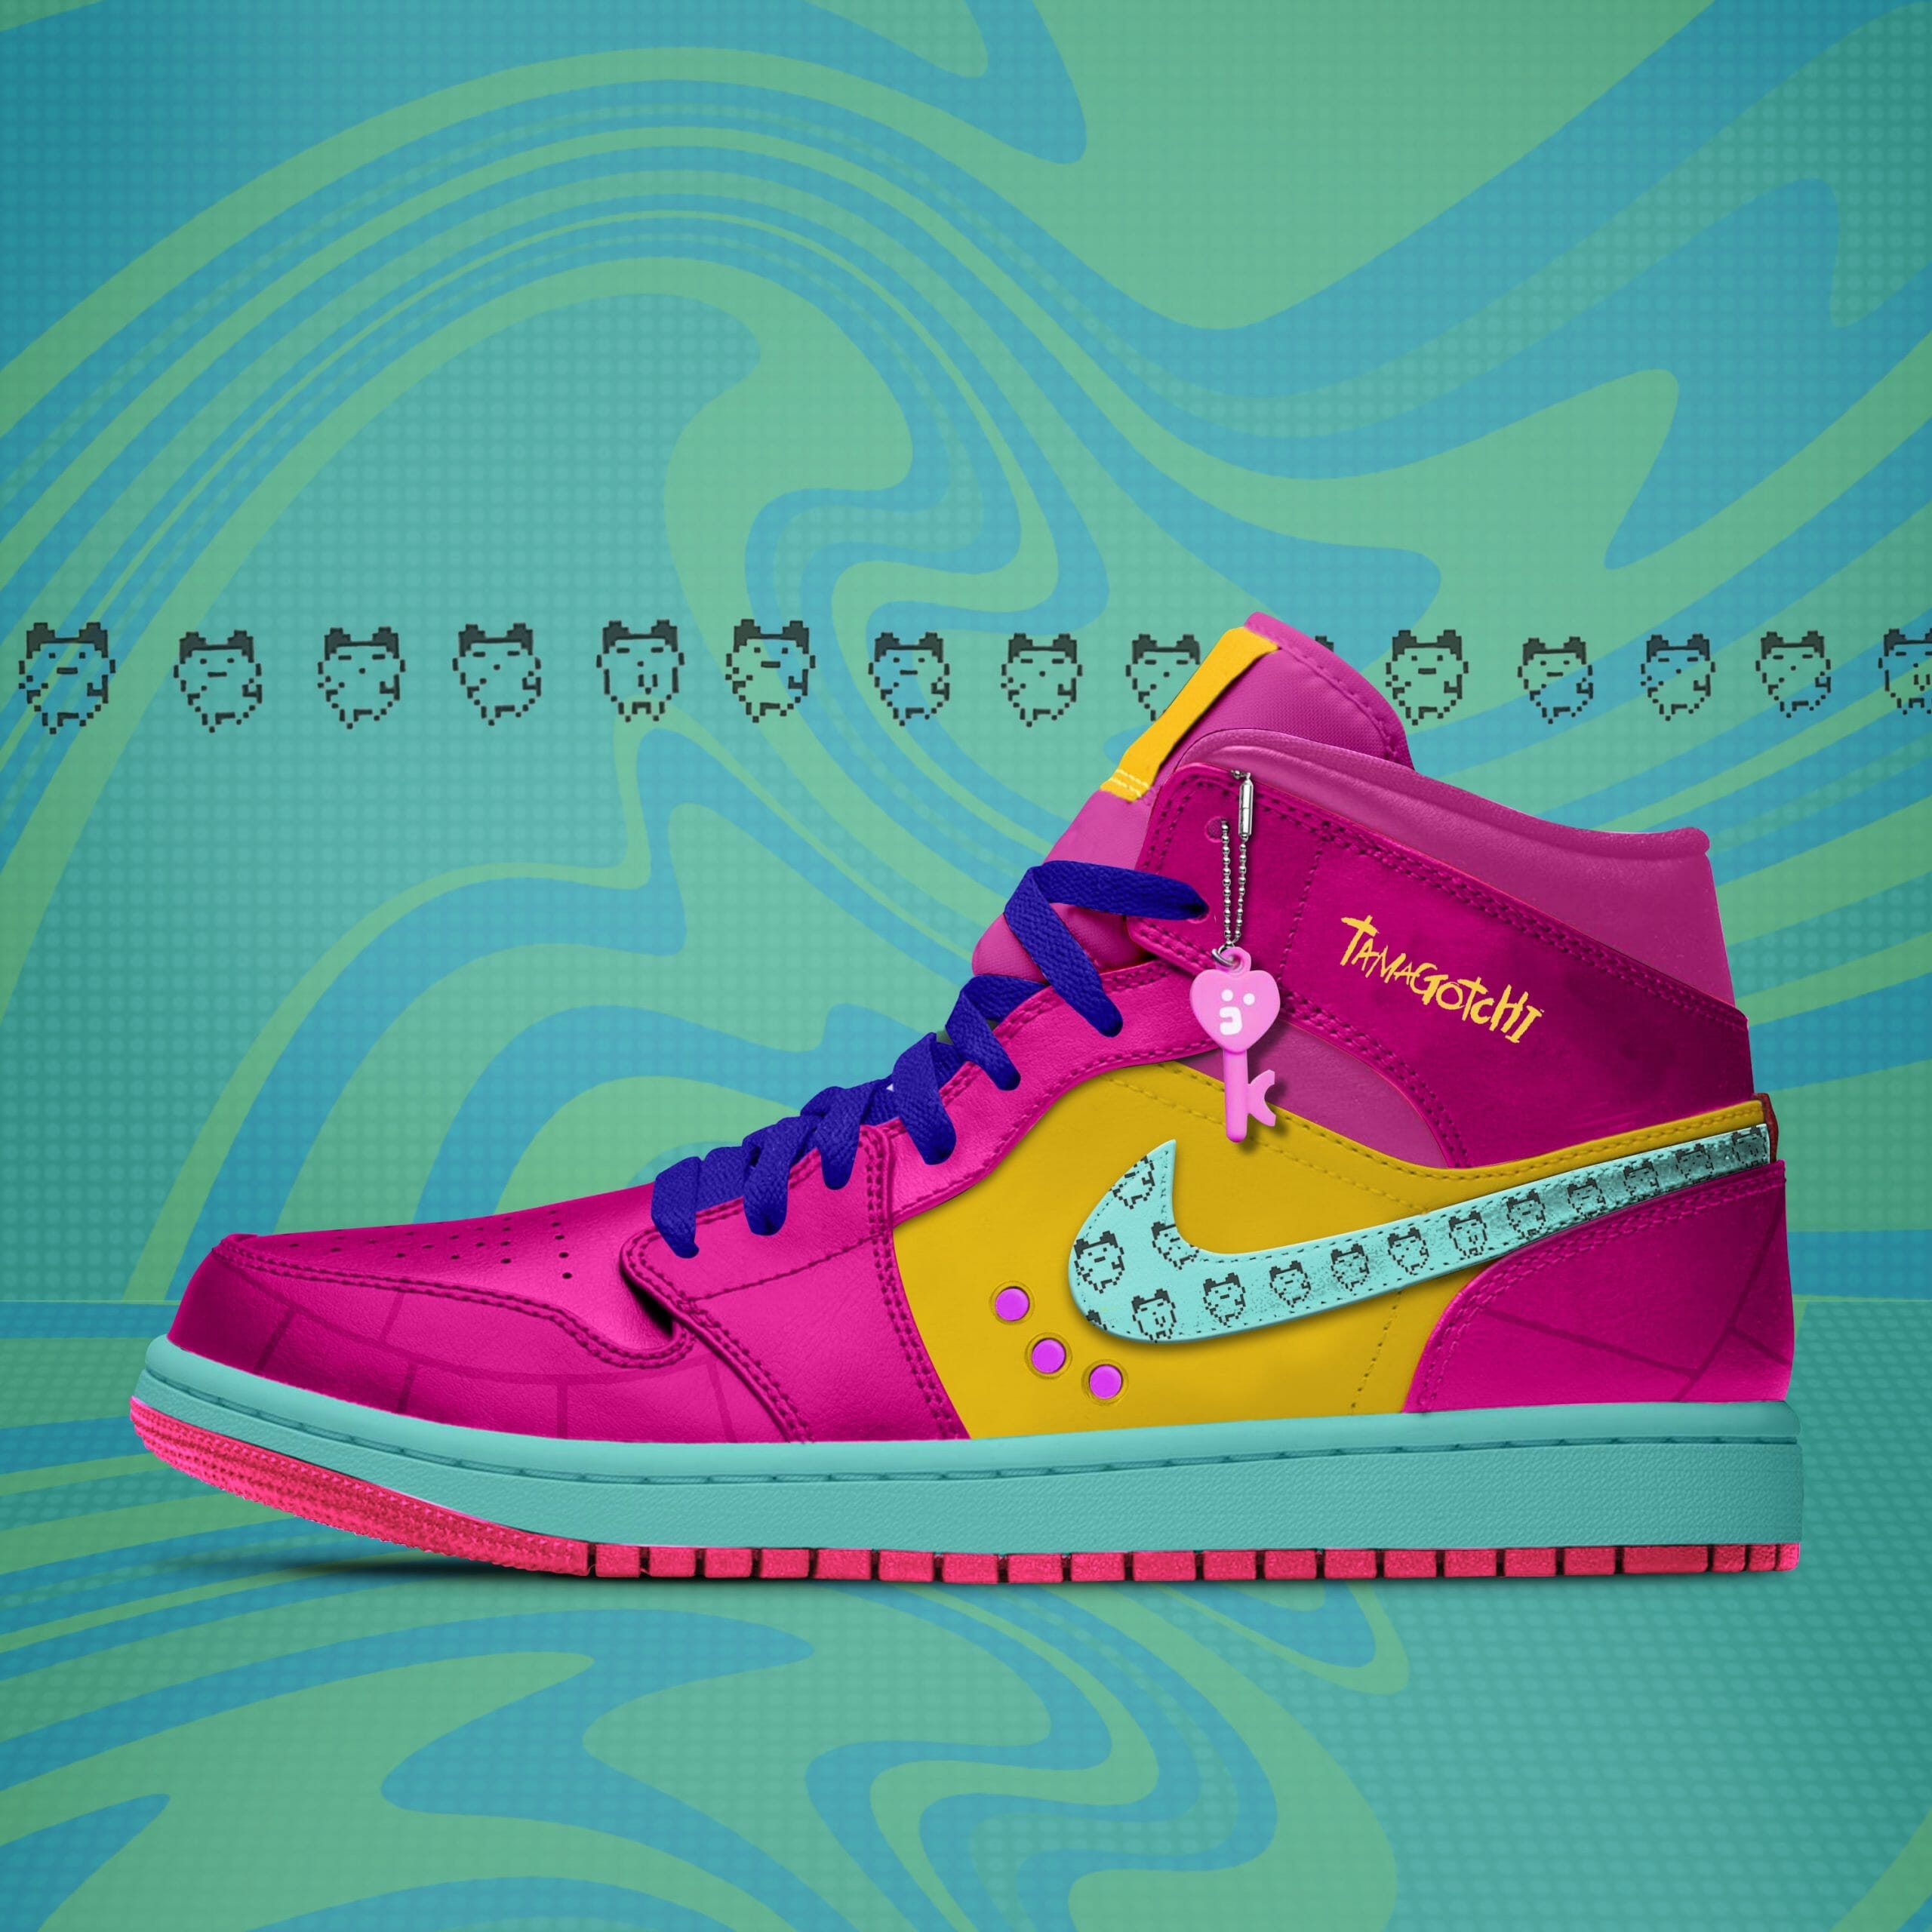 "The Trainergotchis" - Tamagotchi x Air Jordan 1 - geek culture concept shoes from The Sole Supplier